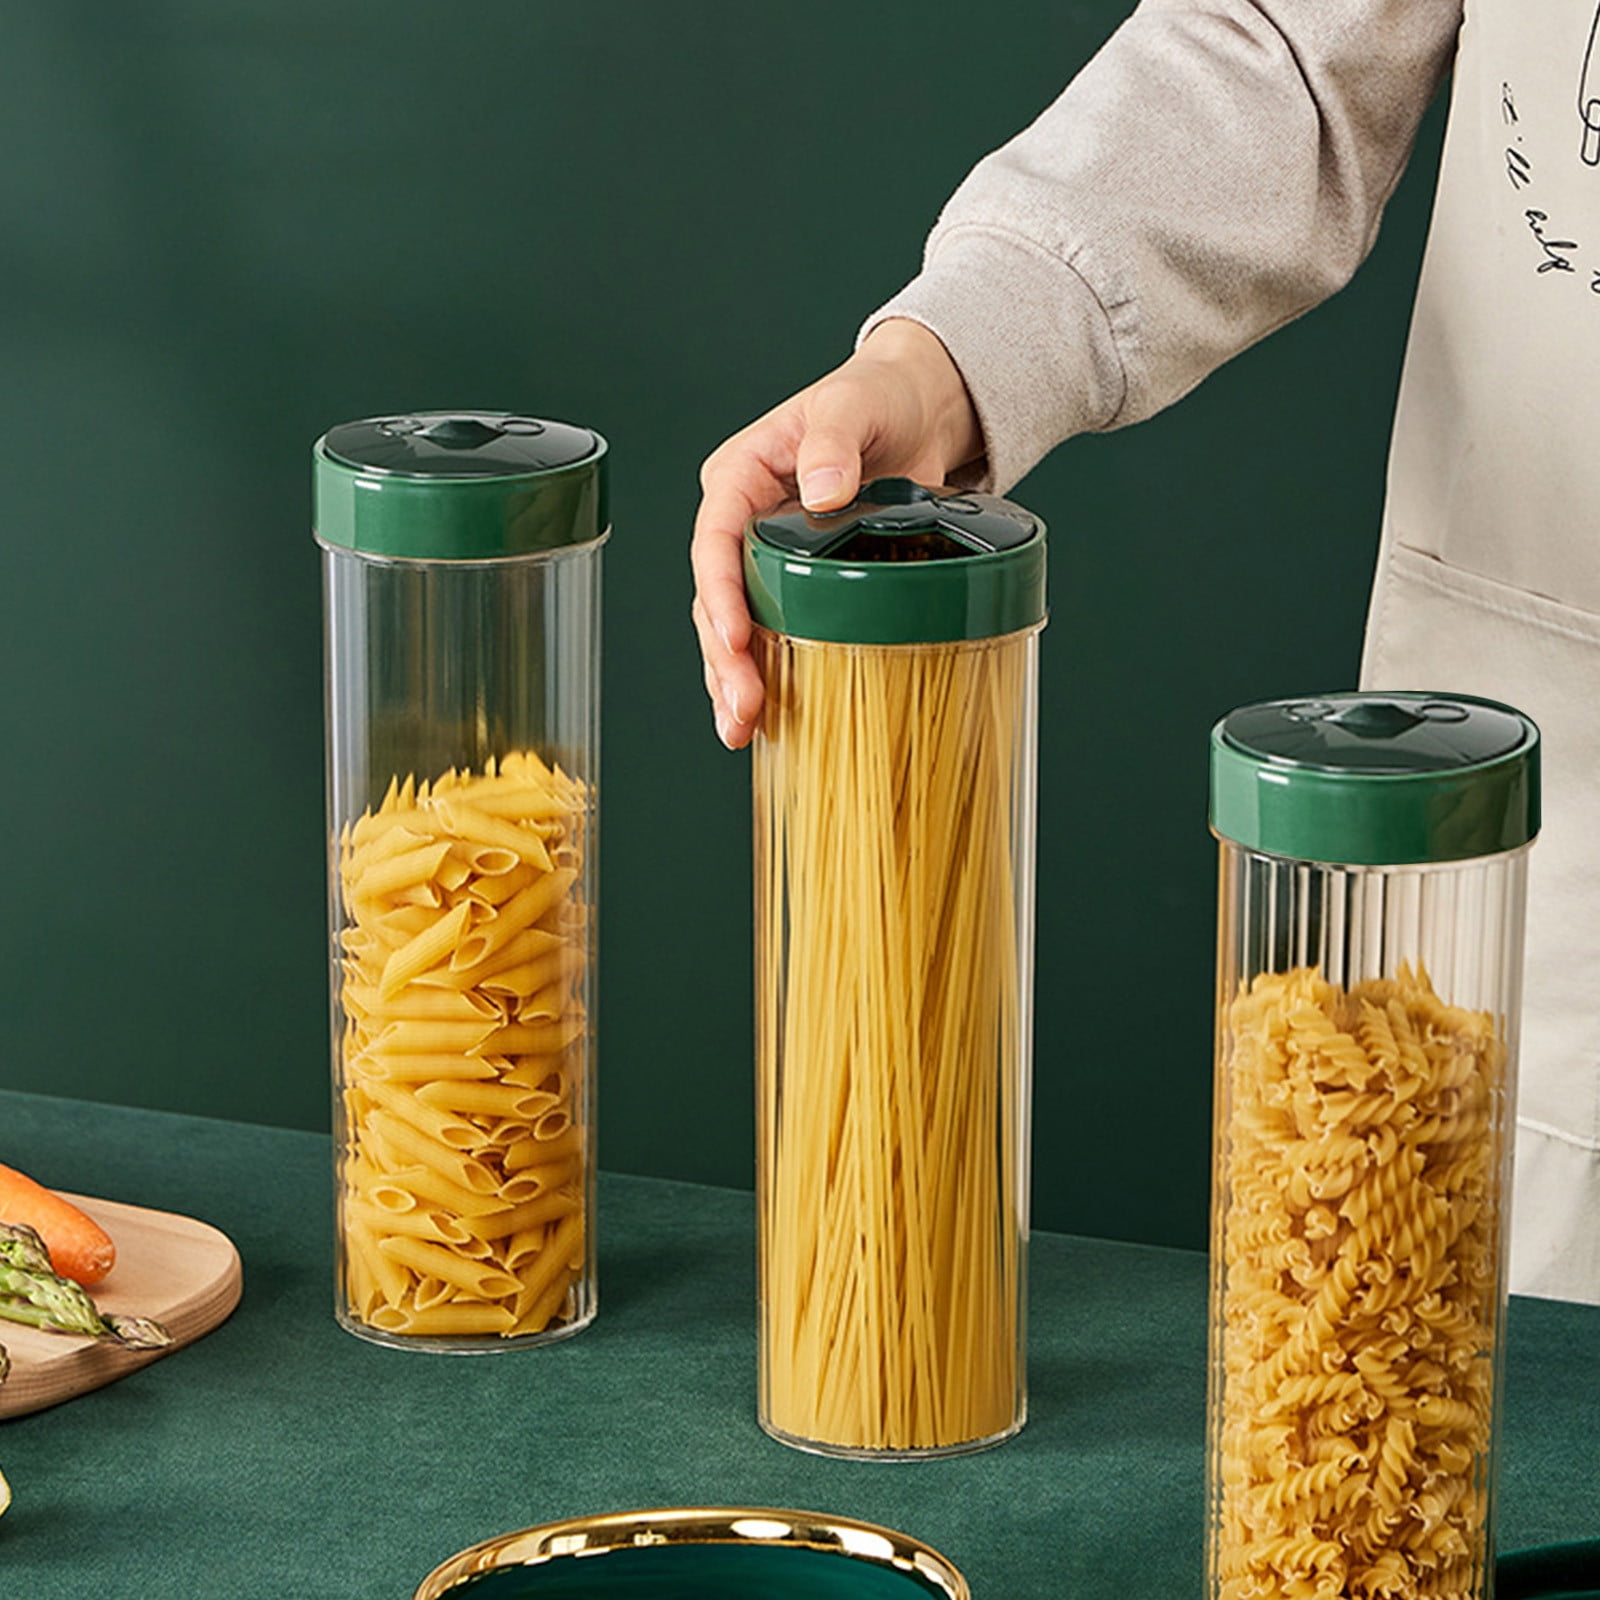 1pc Glass Food Storage Container With Airtight Lid. Large Glass Jar, 41  Oz/61 Oz/95 Oz Capacity For Flour, Grains, Coffee, Pasta. Kitchen Tools,  Kitchen Products, Kitchen Accessories, Home Kitchen Supplies